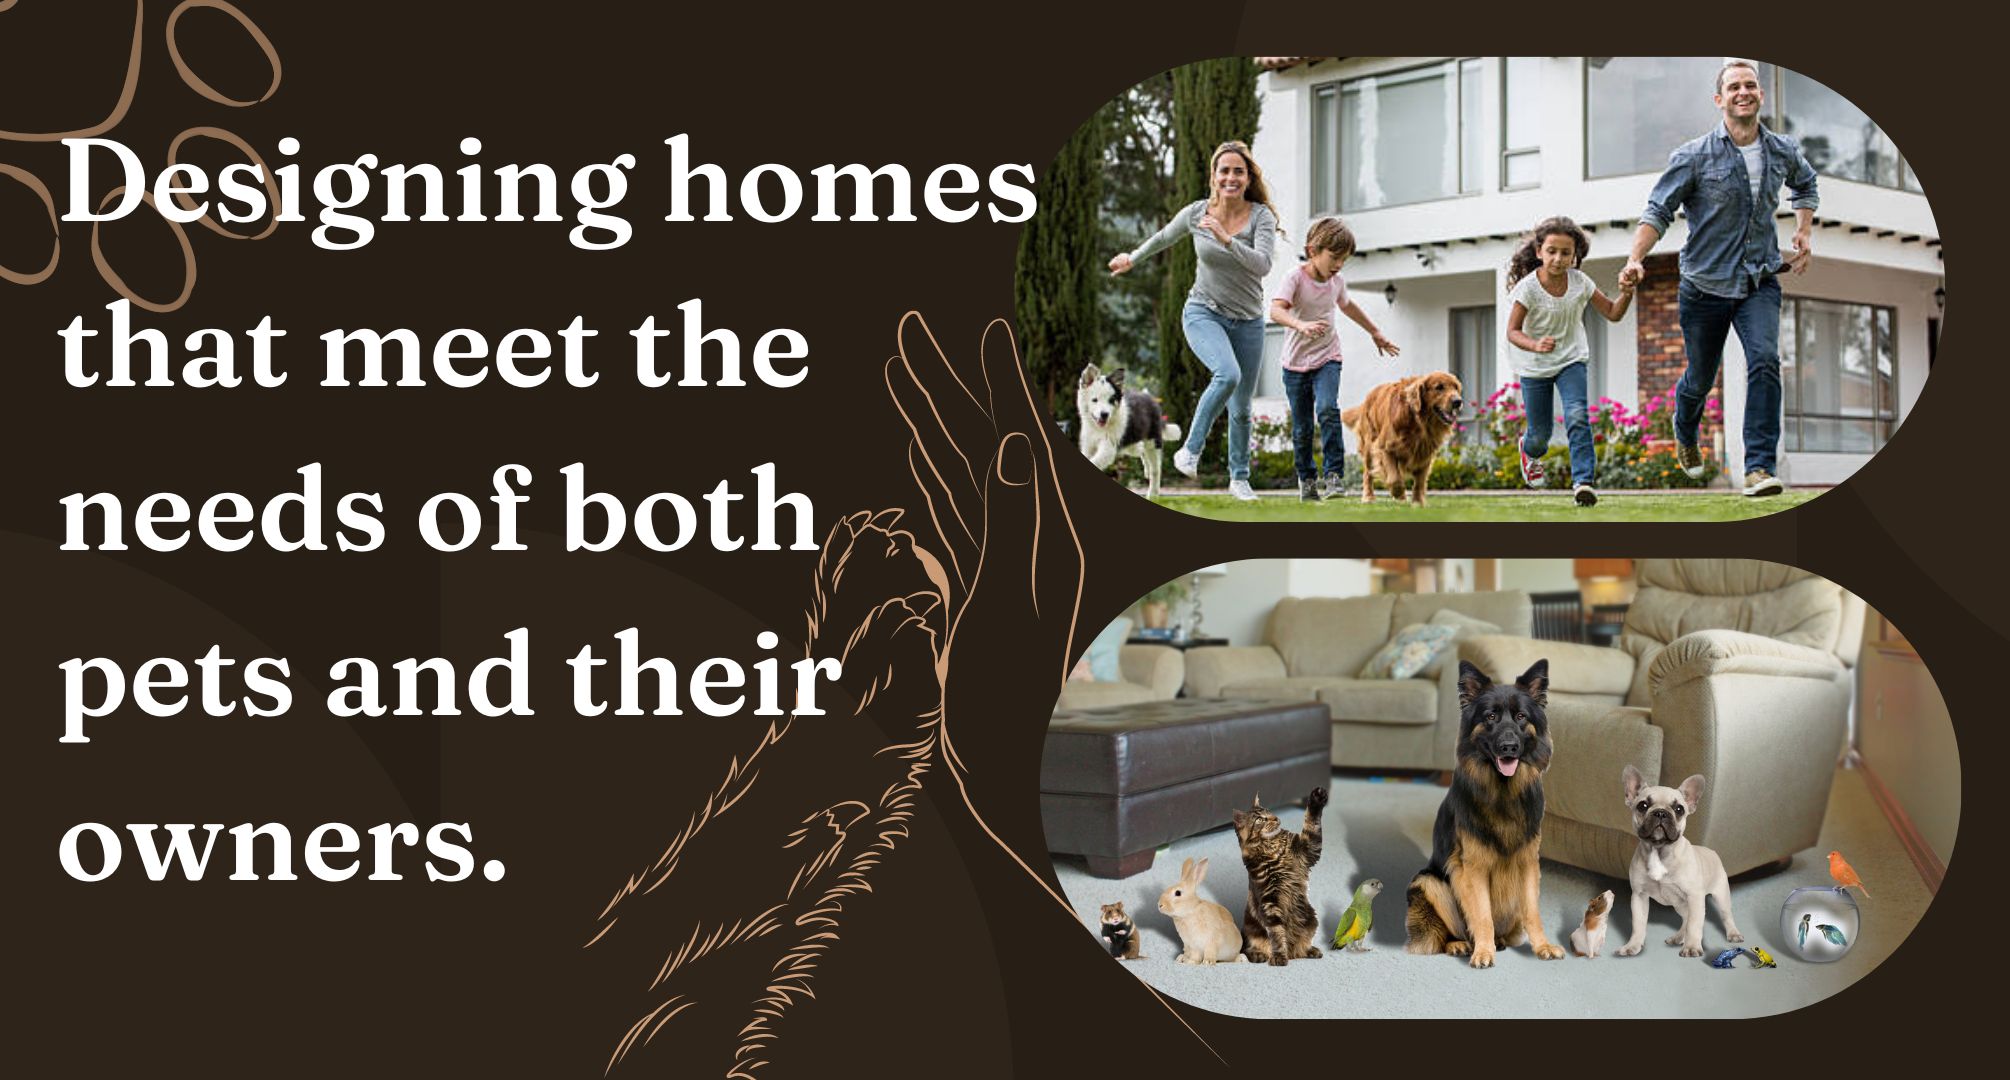 Transform Your Home into a Pet Haven with DustyLaneDesign's Home Improvement Services